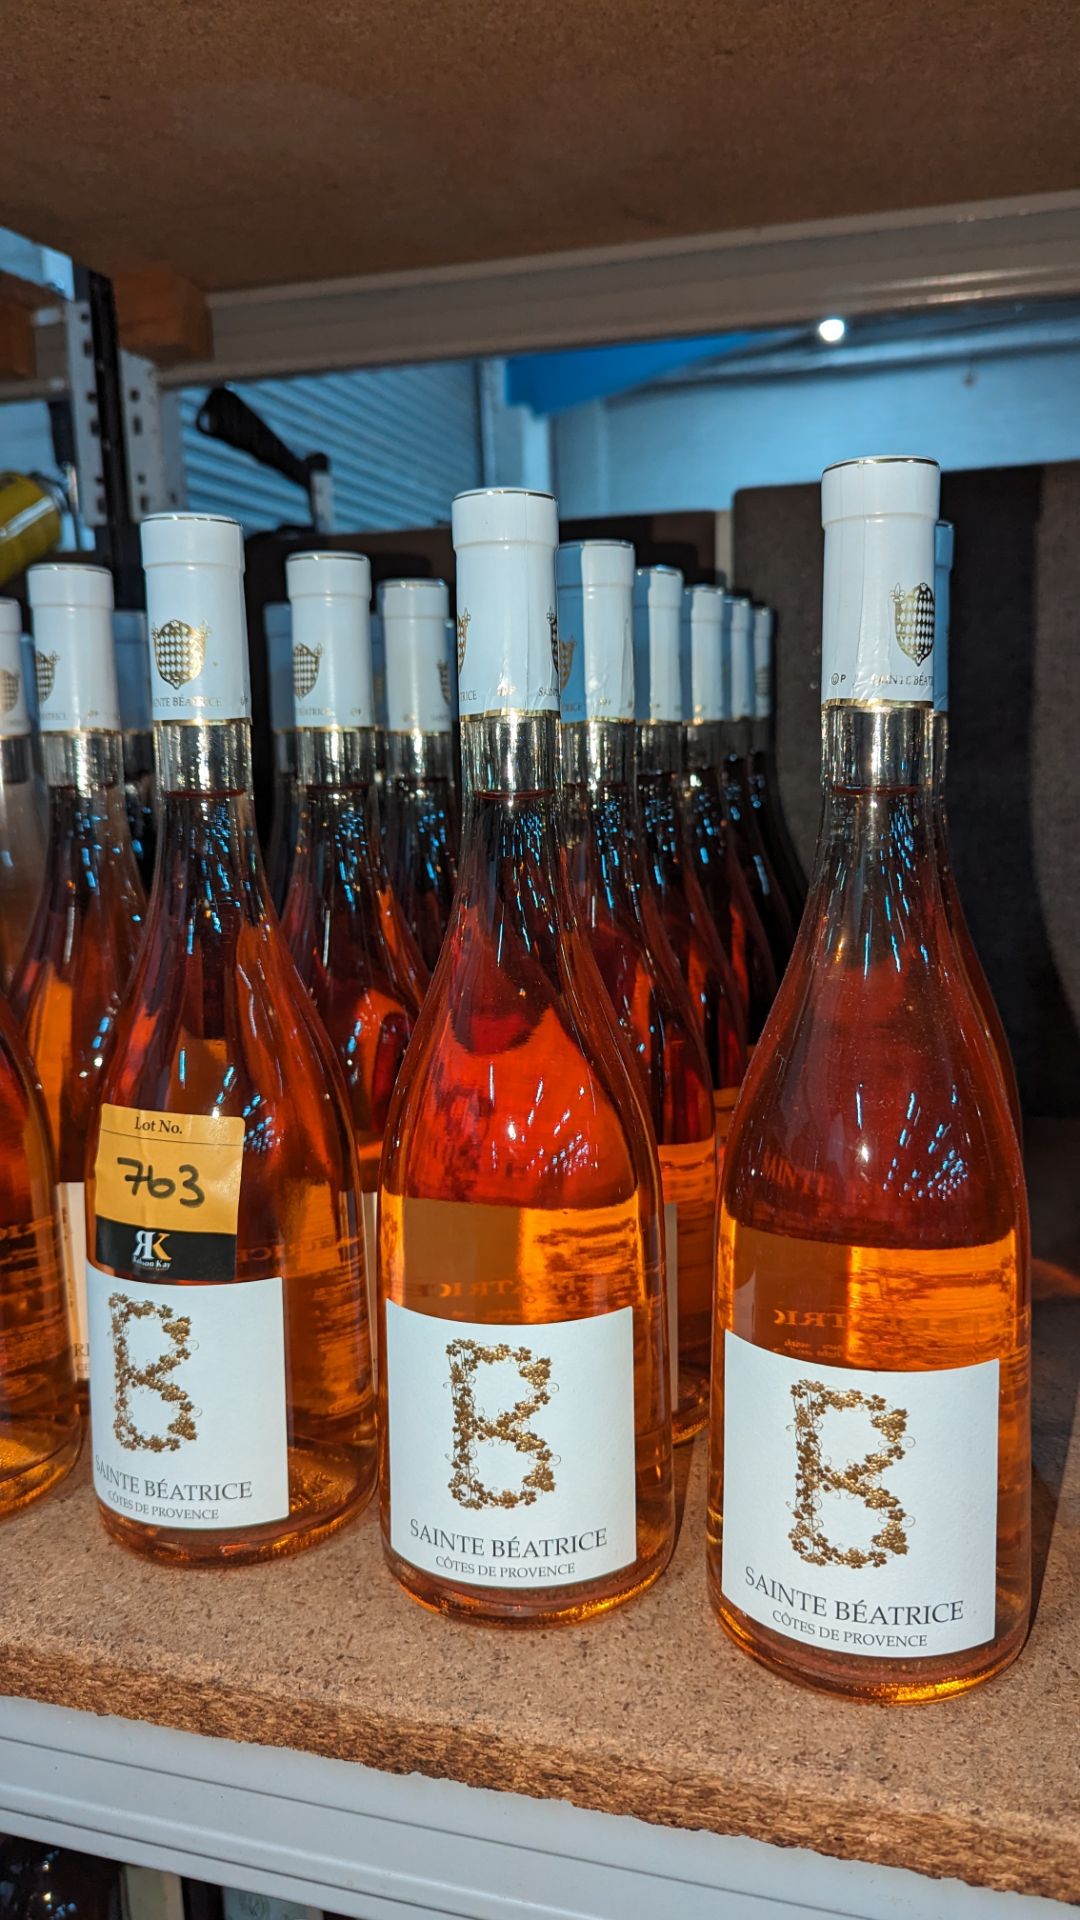 14 bottles of Sainte Béatrice Côtes de Provence 2020 rosé French wine sold under AWRS number XQAW000 - Image 3 of 4